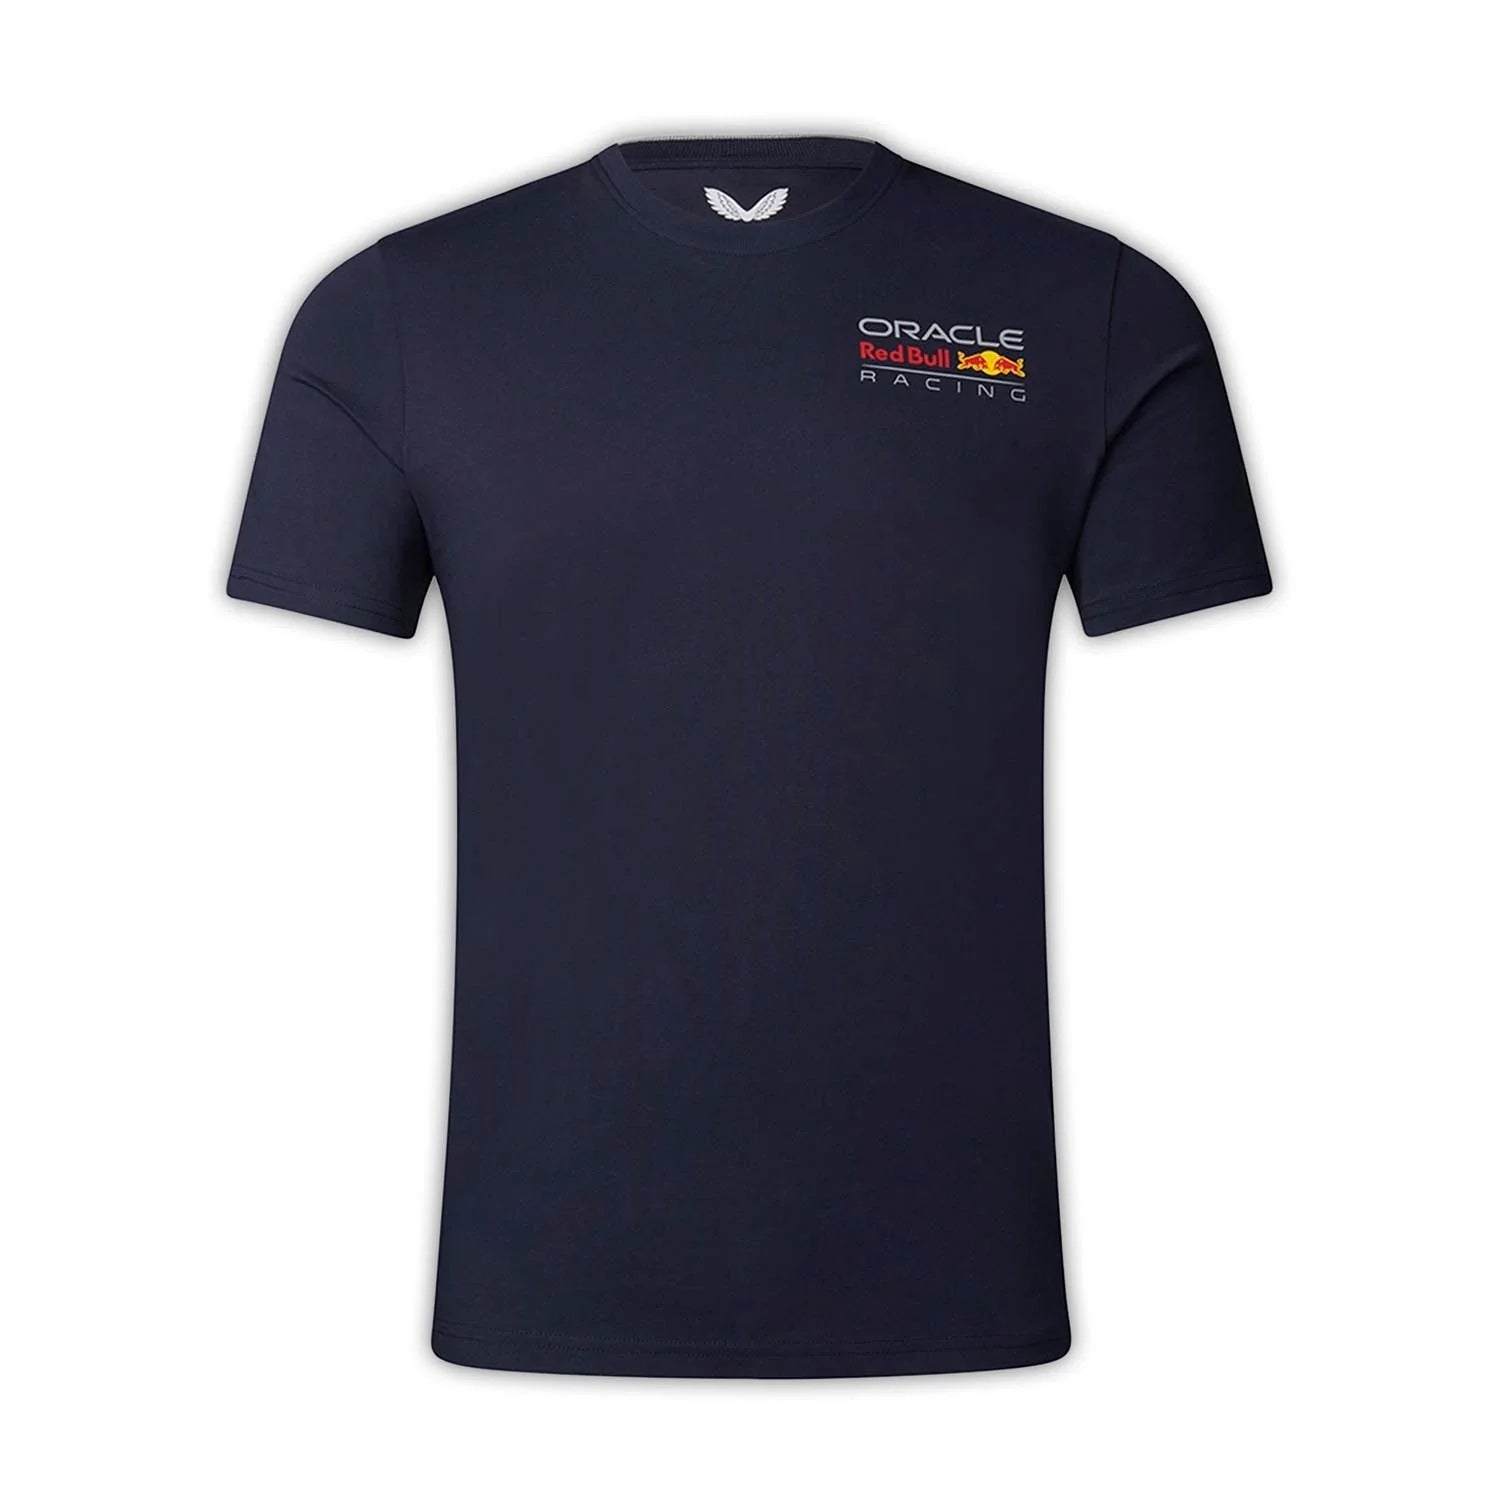 Castore Oracle T Shirt | Red Bull Racing Shirt | Formula 1 Driver T Shirts | F1 Clothing | Color Blue | Best Wearing in Bahrain | Halabh.com